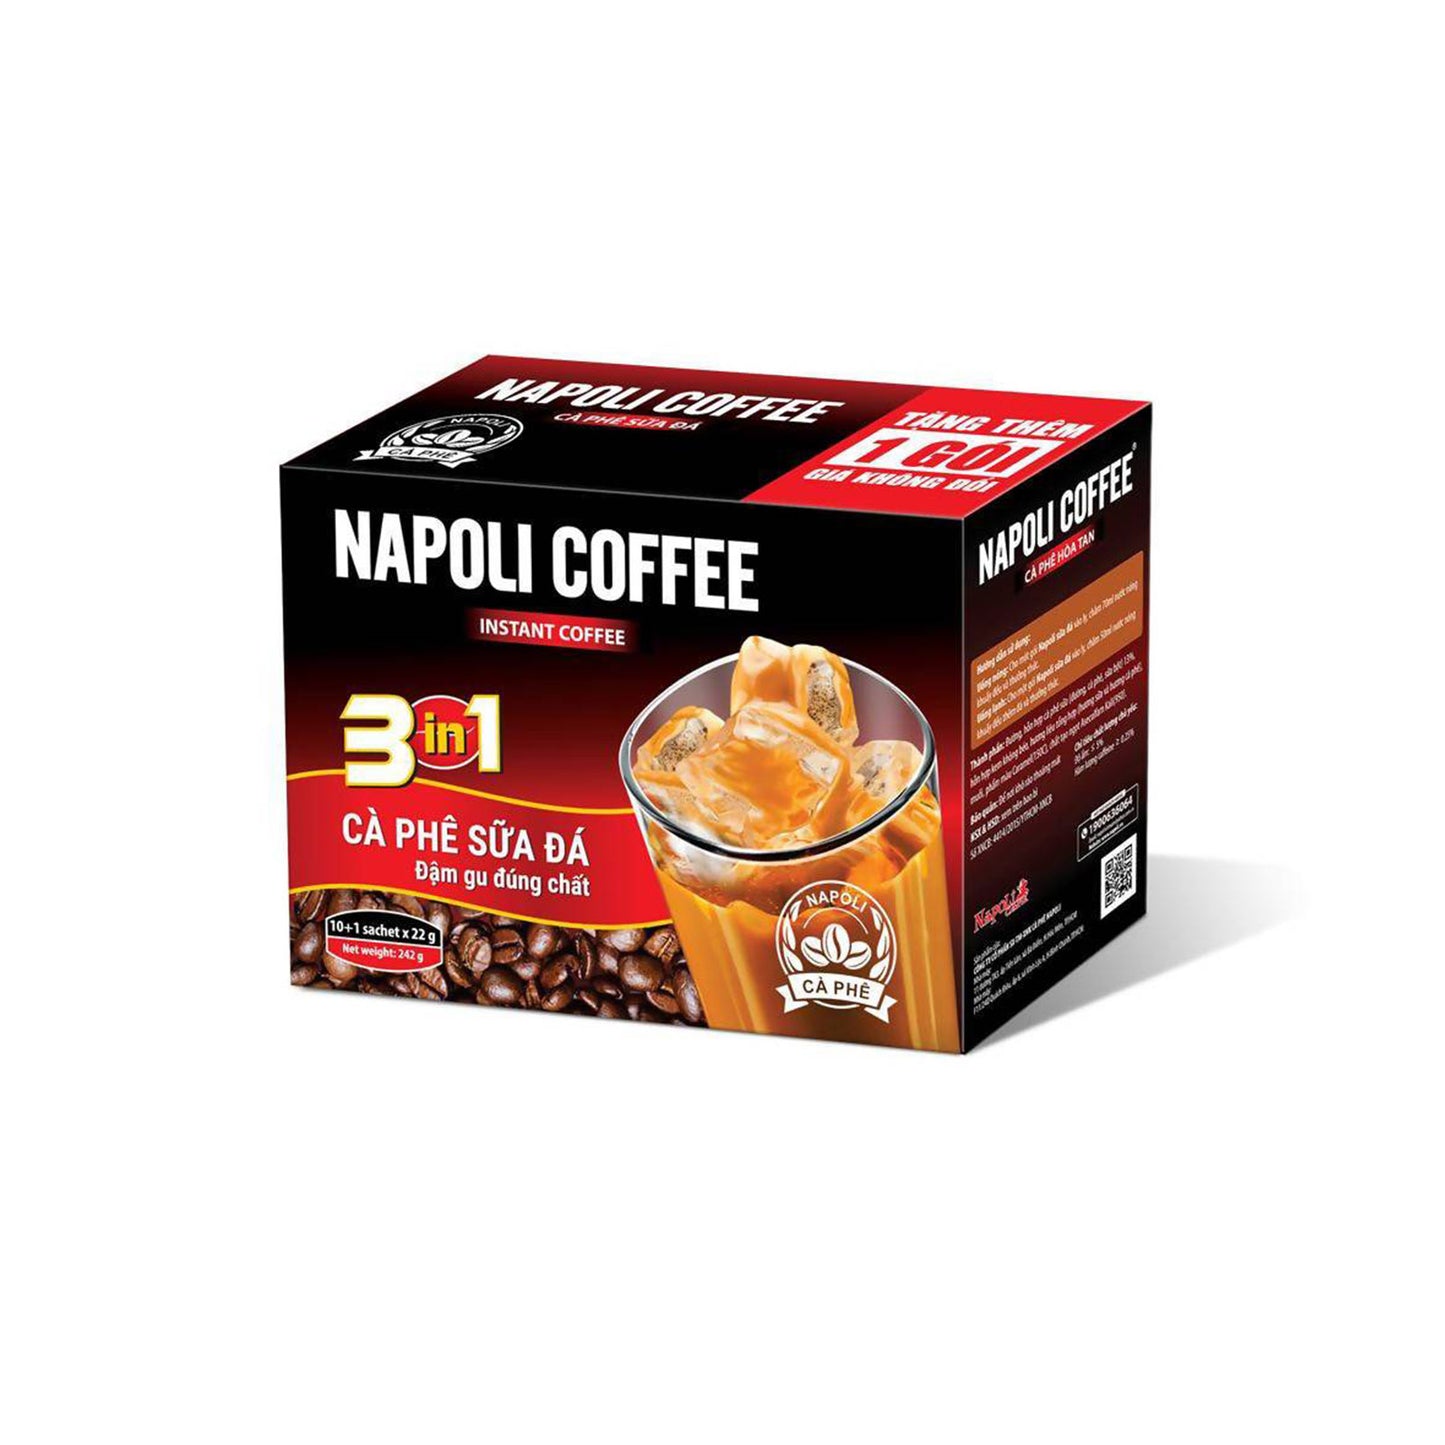 Instant coffee 3in1 by Napoli